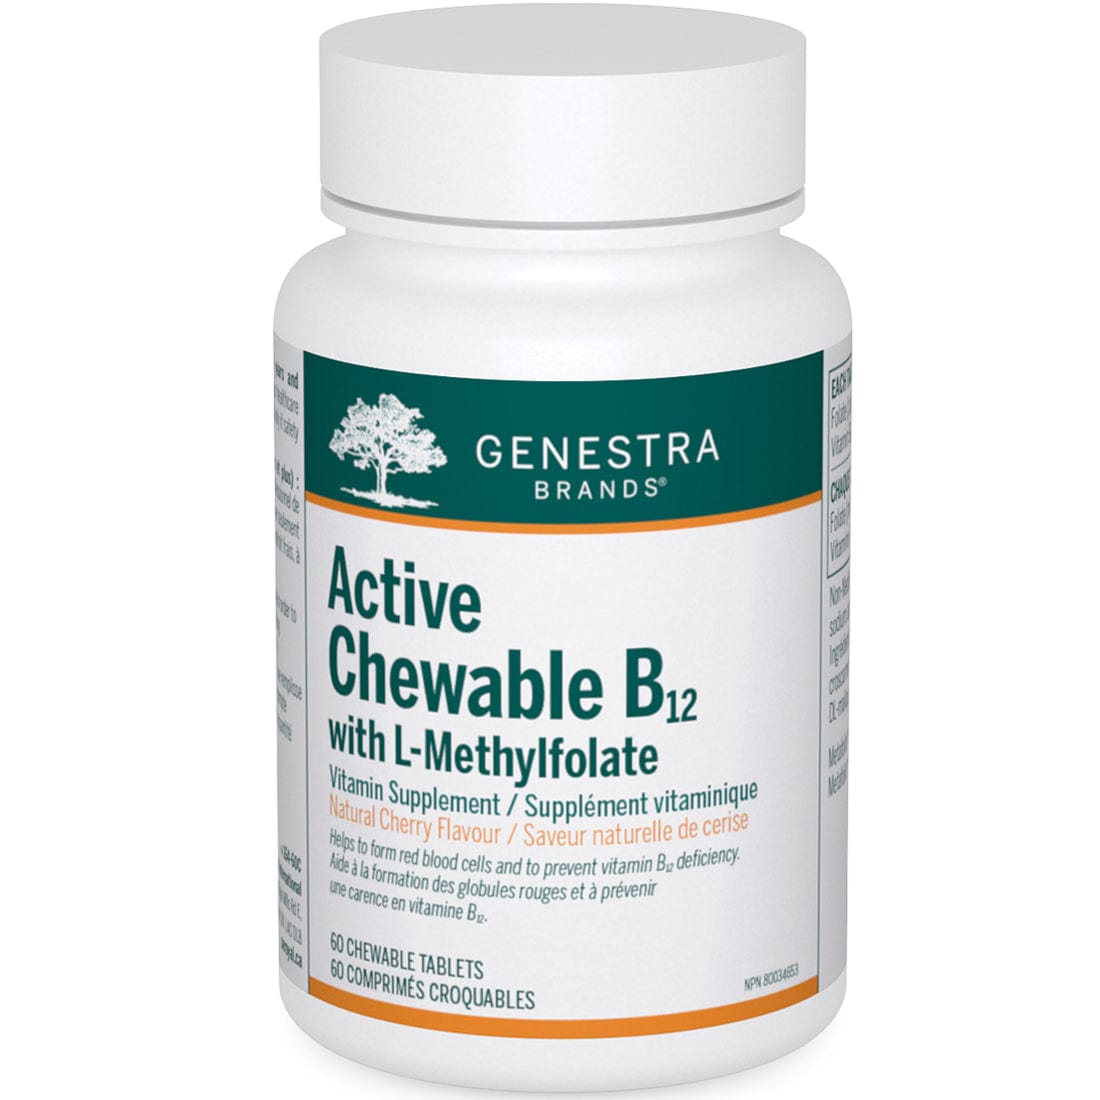 Genestra Active Chewable B12 with L-Methylfolate, 60 Tablets